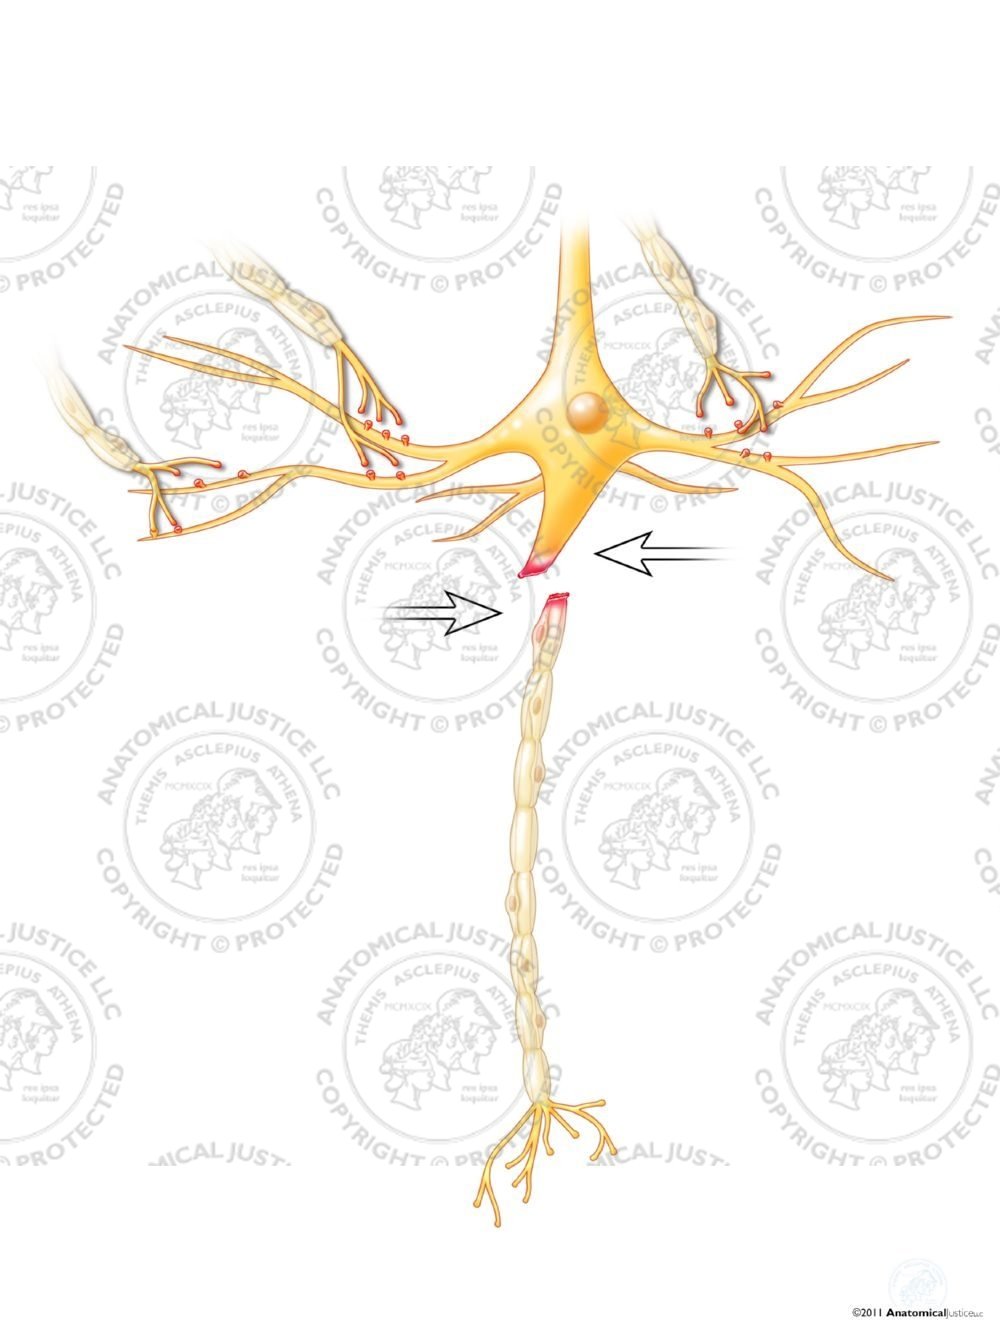 Shearing of an Axon Due To Applied Forces – White – No Text